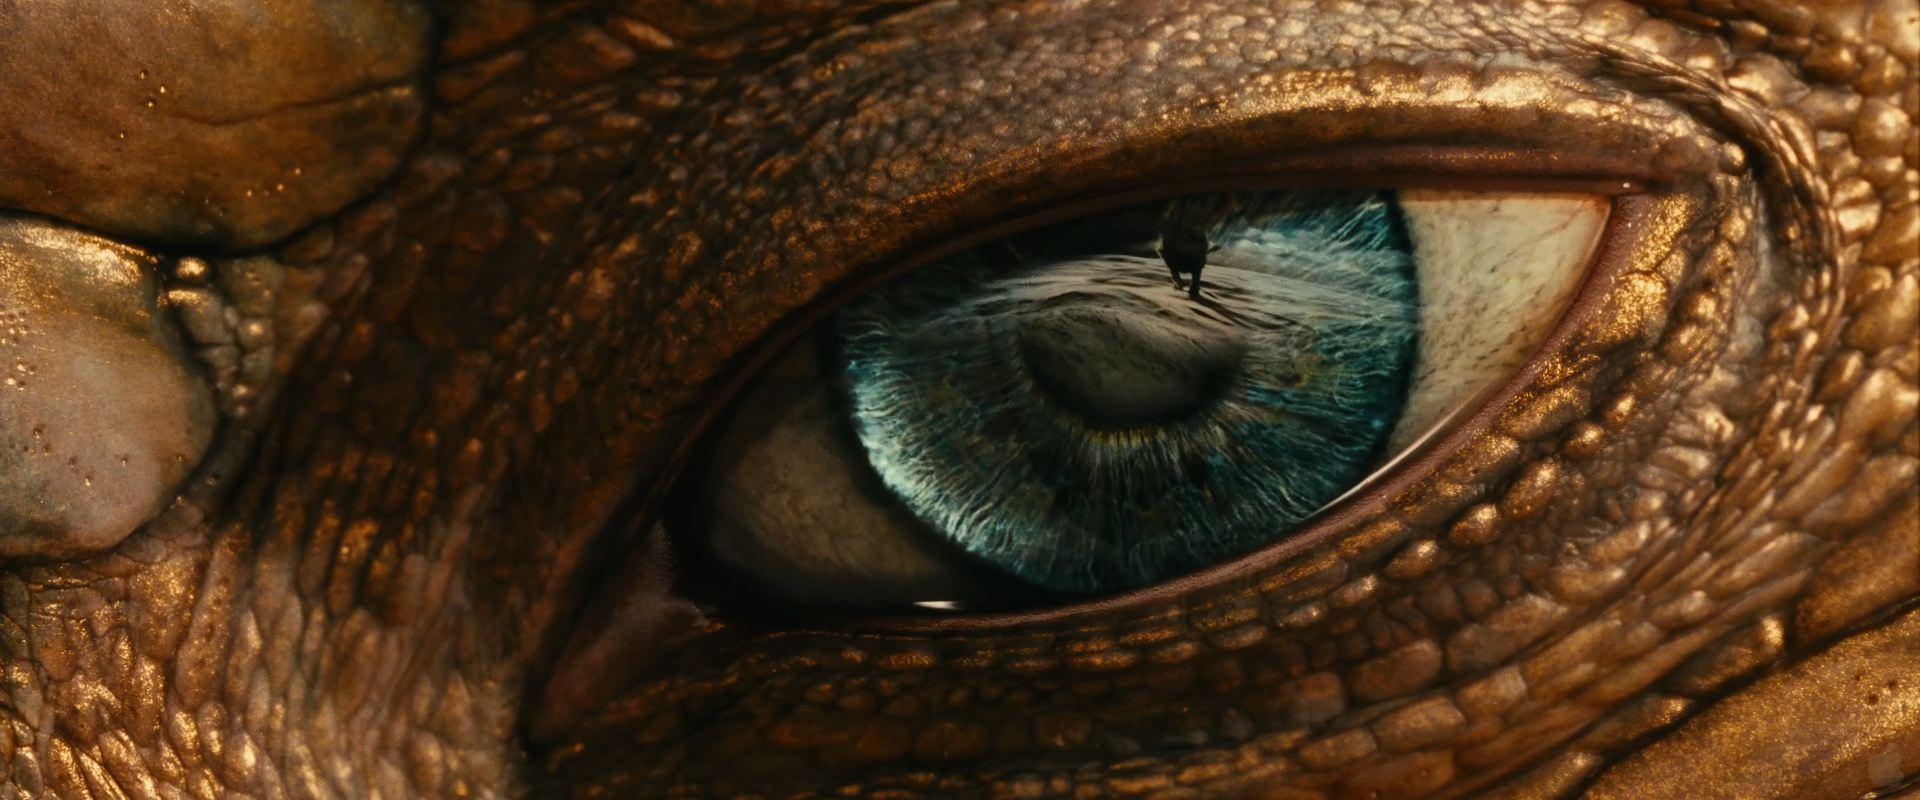 Eye of the Dragon from Chronicles of Narnia Voyage of the Dawn